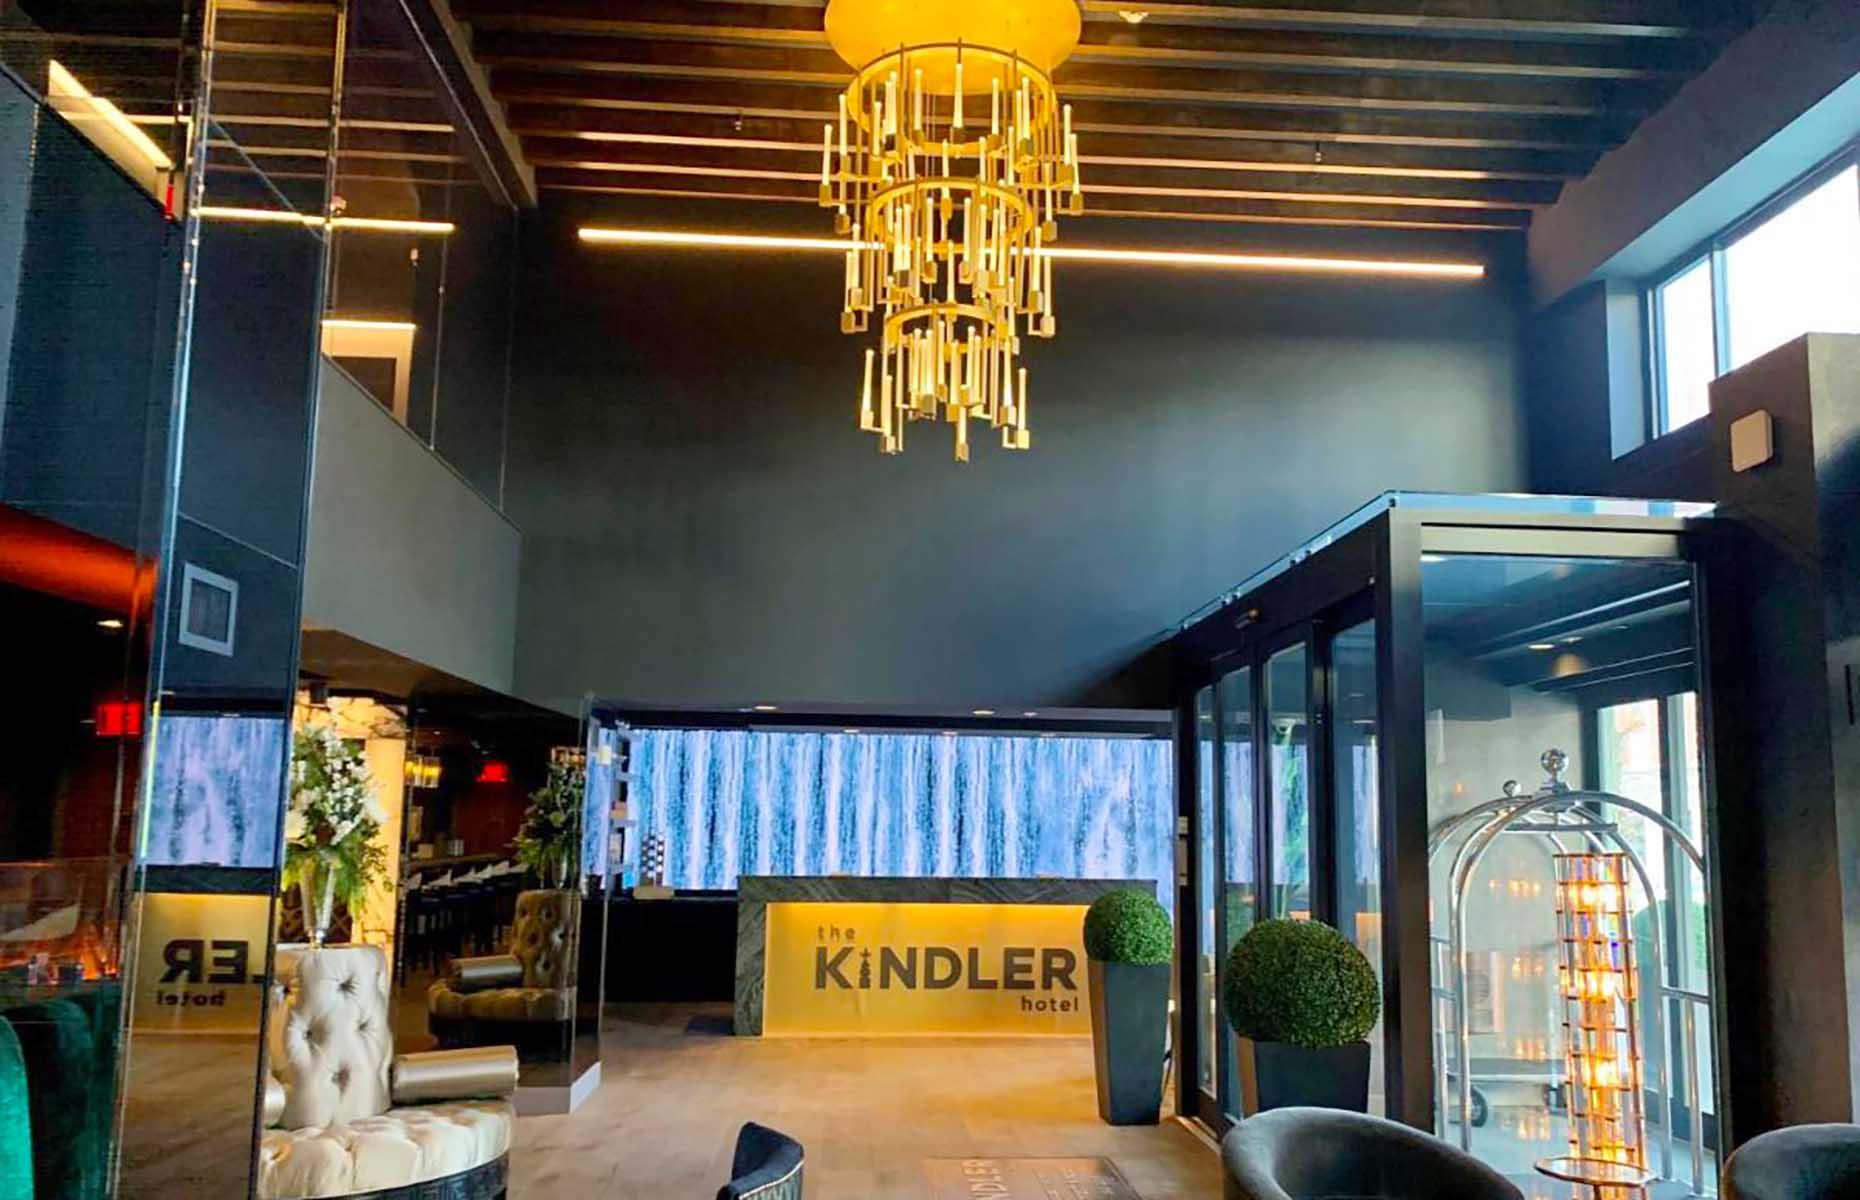 <p>Opened in 2019, the Kindler Hotel brings a big dose of modernity to Nebraska's historic capital. It tips itself as the first of its kind in the city and is named for Ken Kindler, a local artist who specialized in copper work, and whose creations can be seen in the hotel lobby. There's a sumptuous lounge for artisan cocktails and a top-notch gym. You'll be in easy reach of all the attractions downtown too.</p>